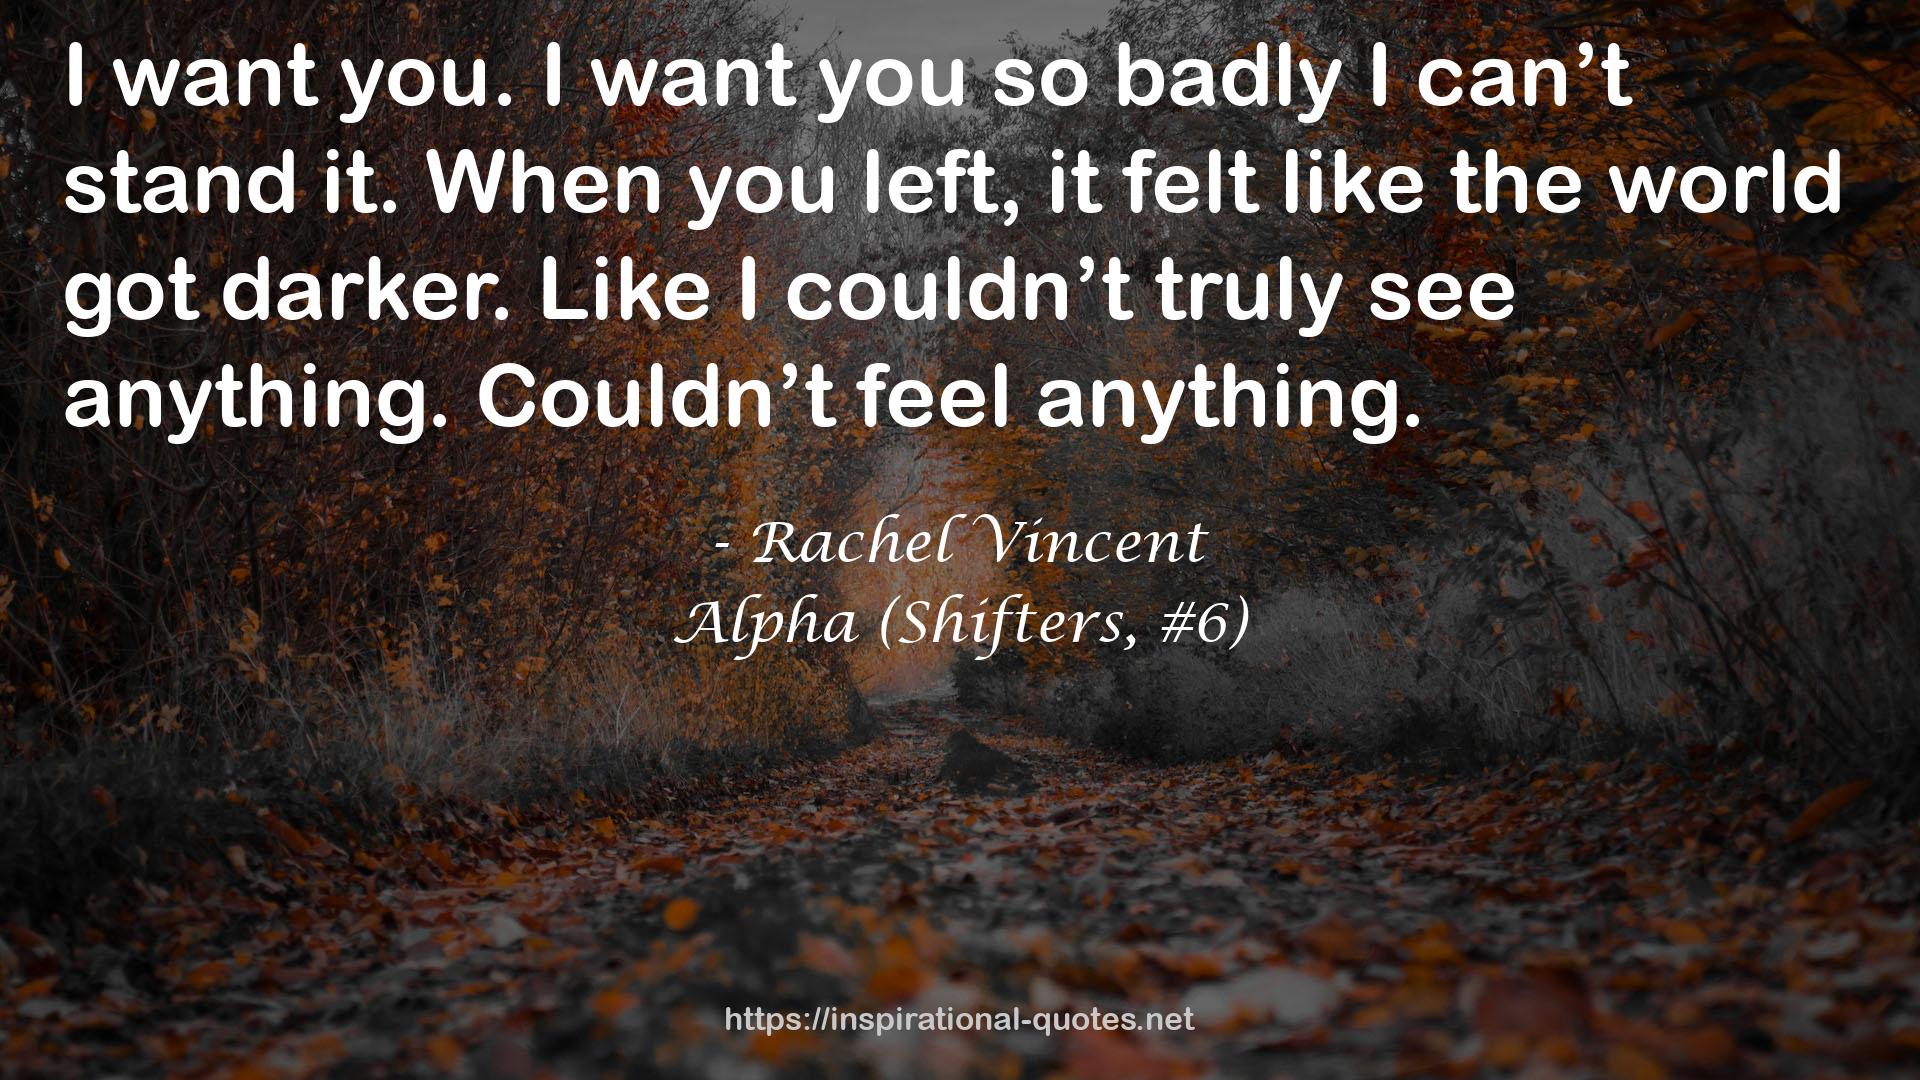 Alpha (Shifters, #6) QUOTES